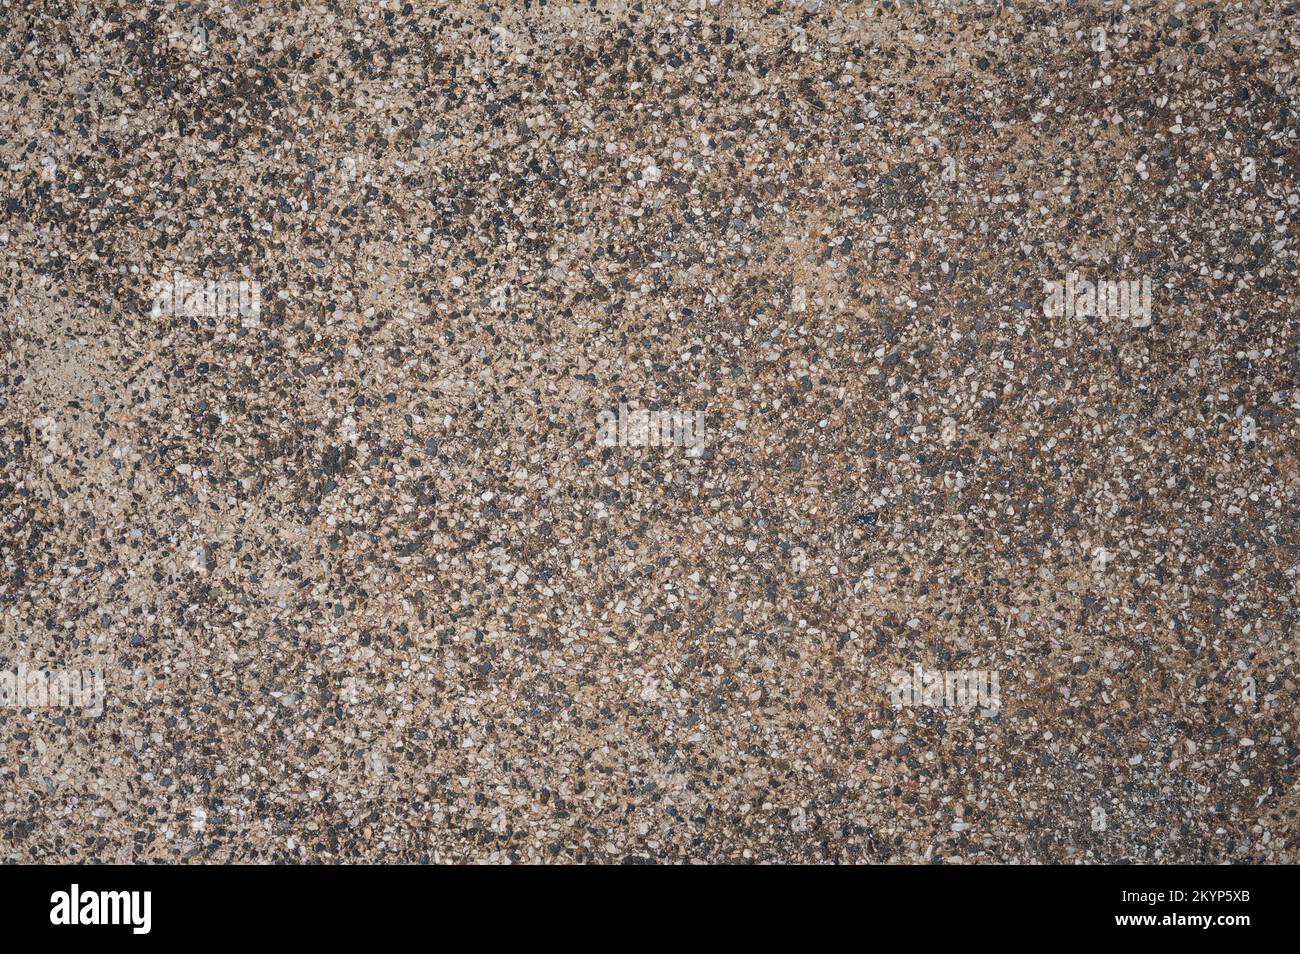 Texture of small rock peddle on sand background close up view Stock Photo